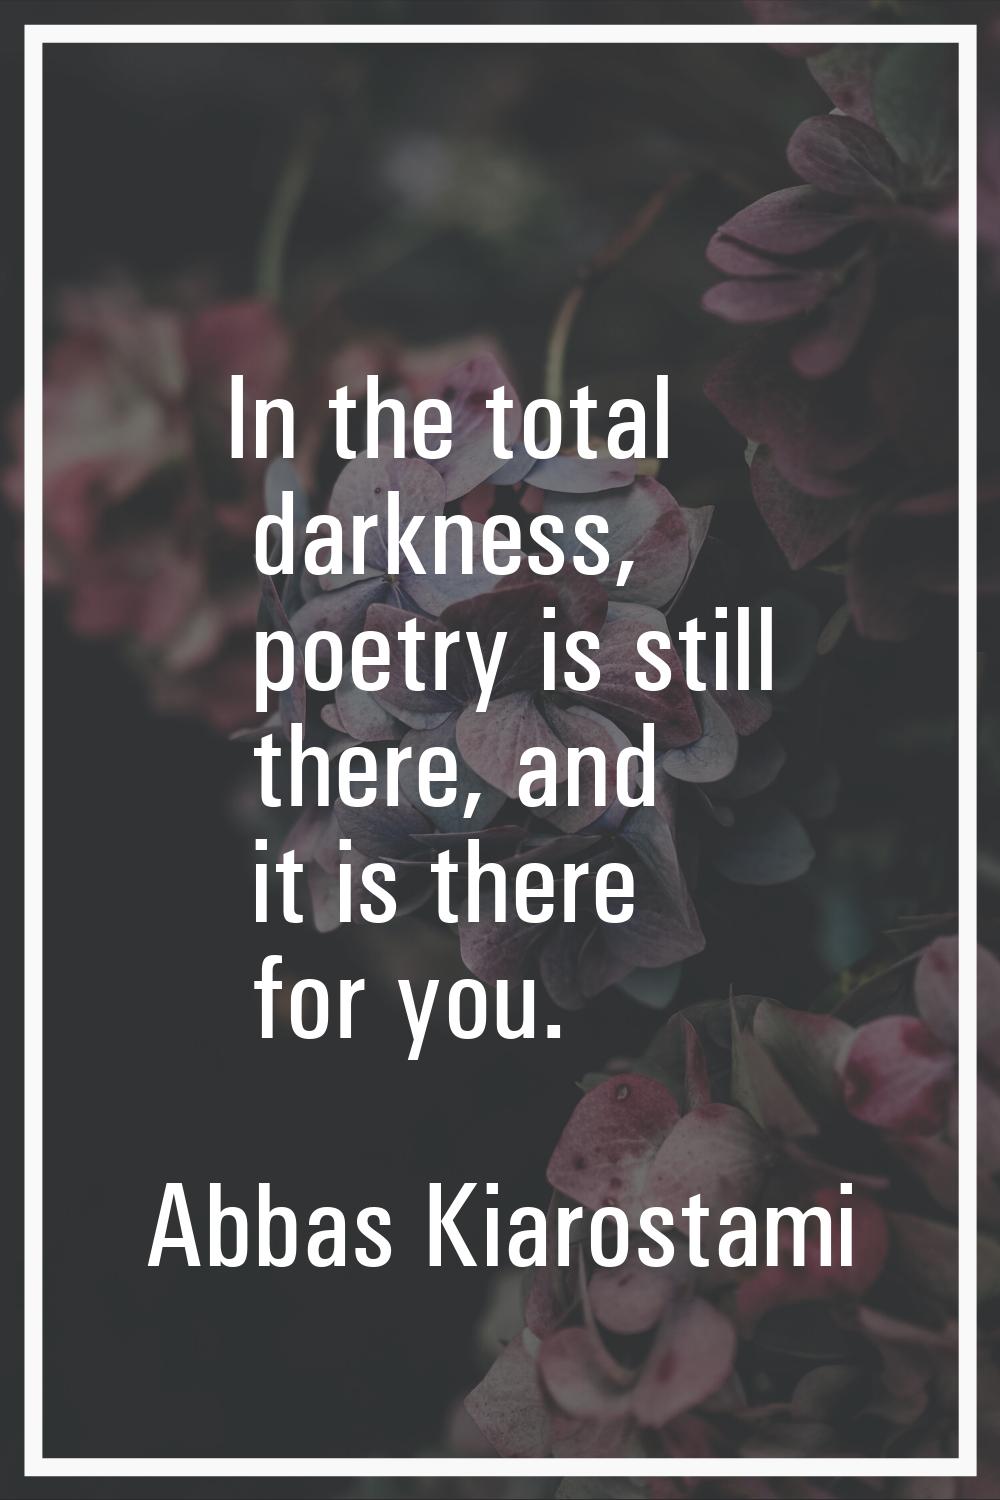 In the total darkness, poetry is still there, and it is there for you.